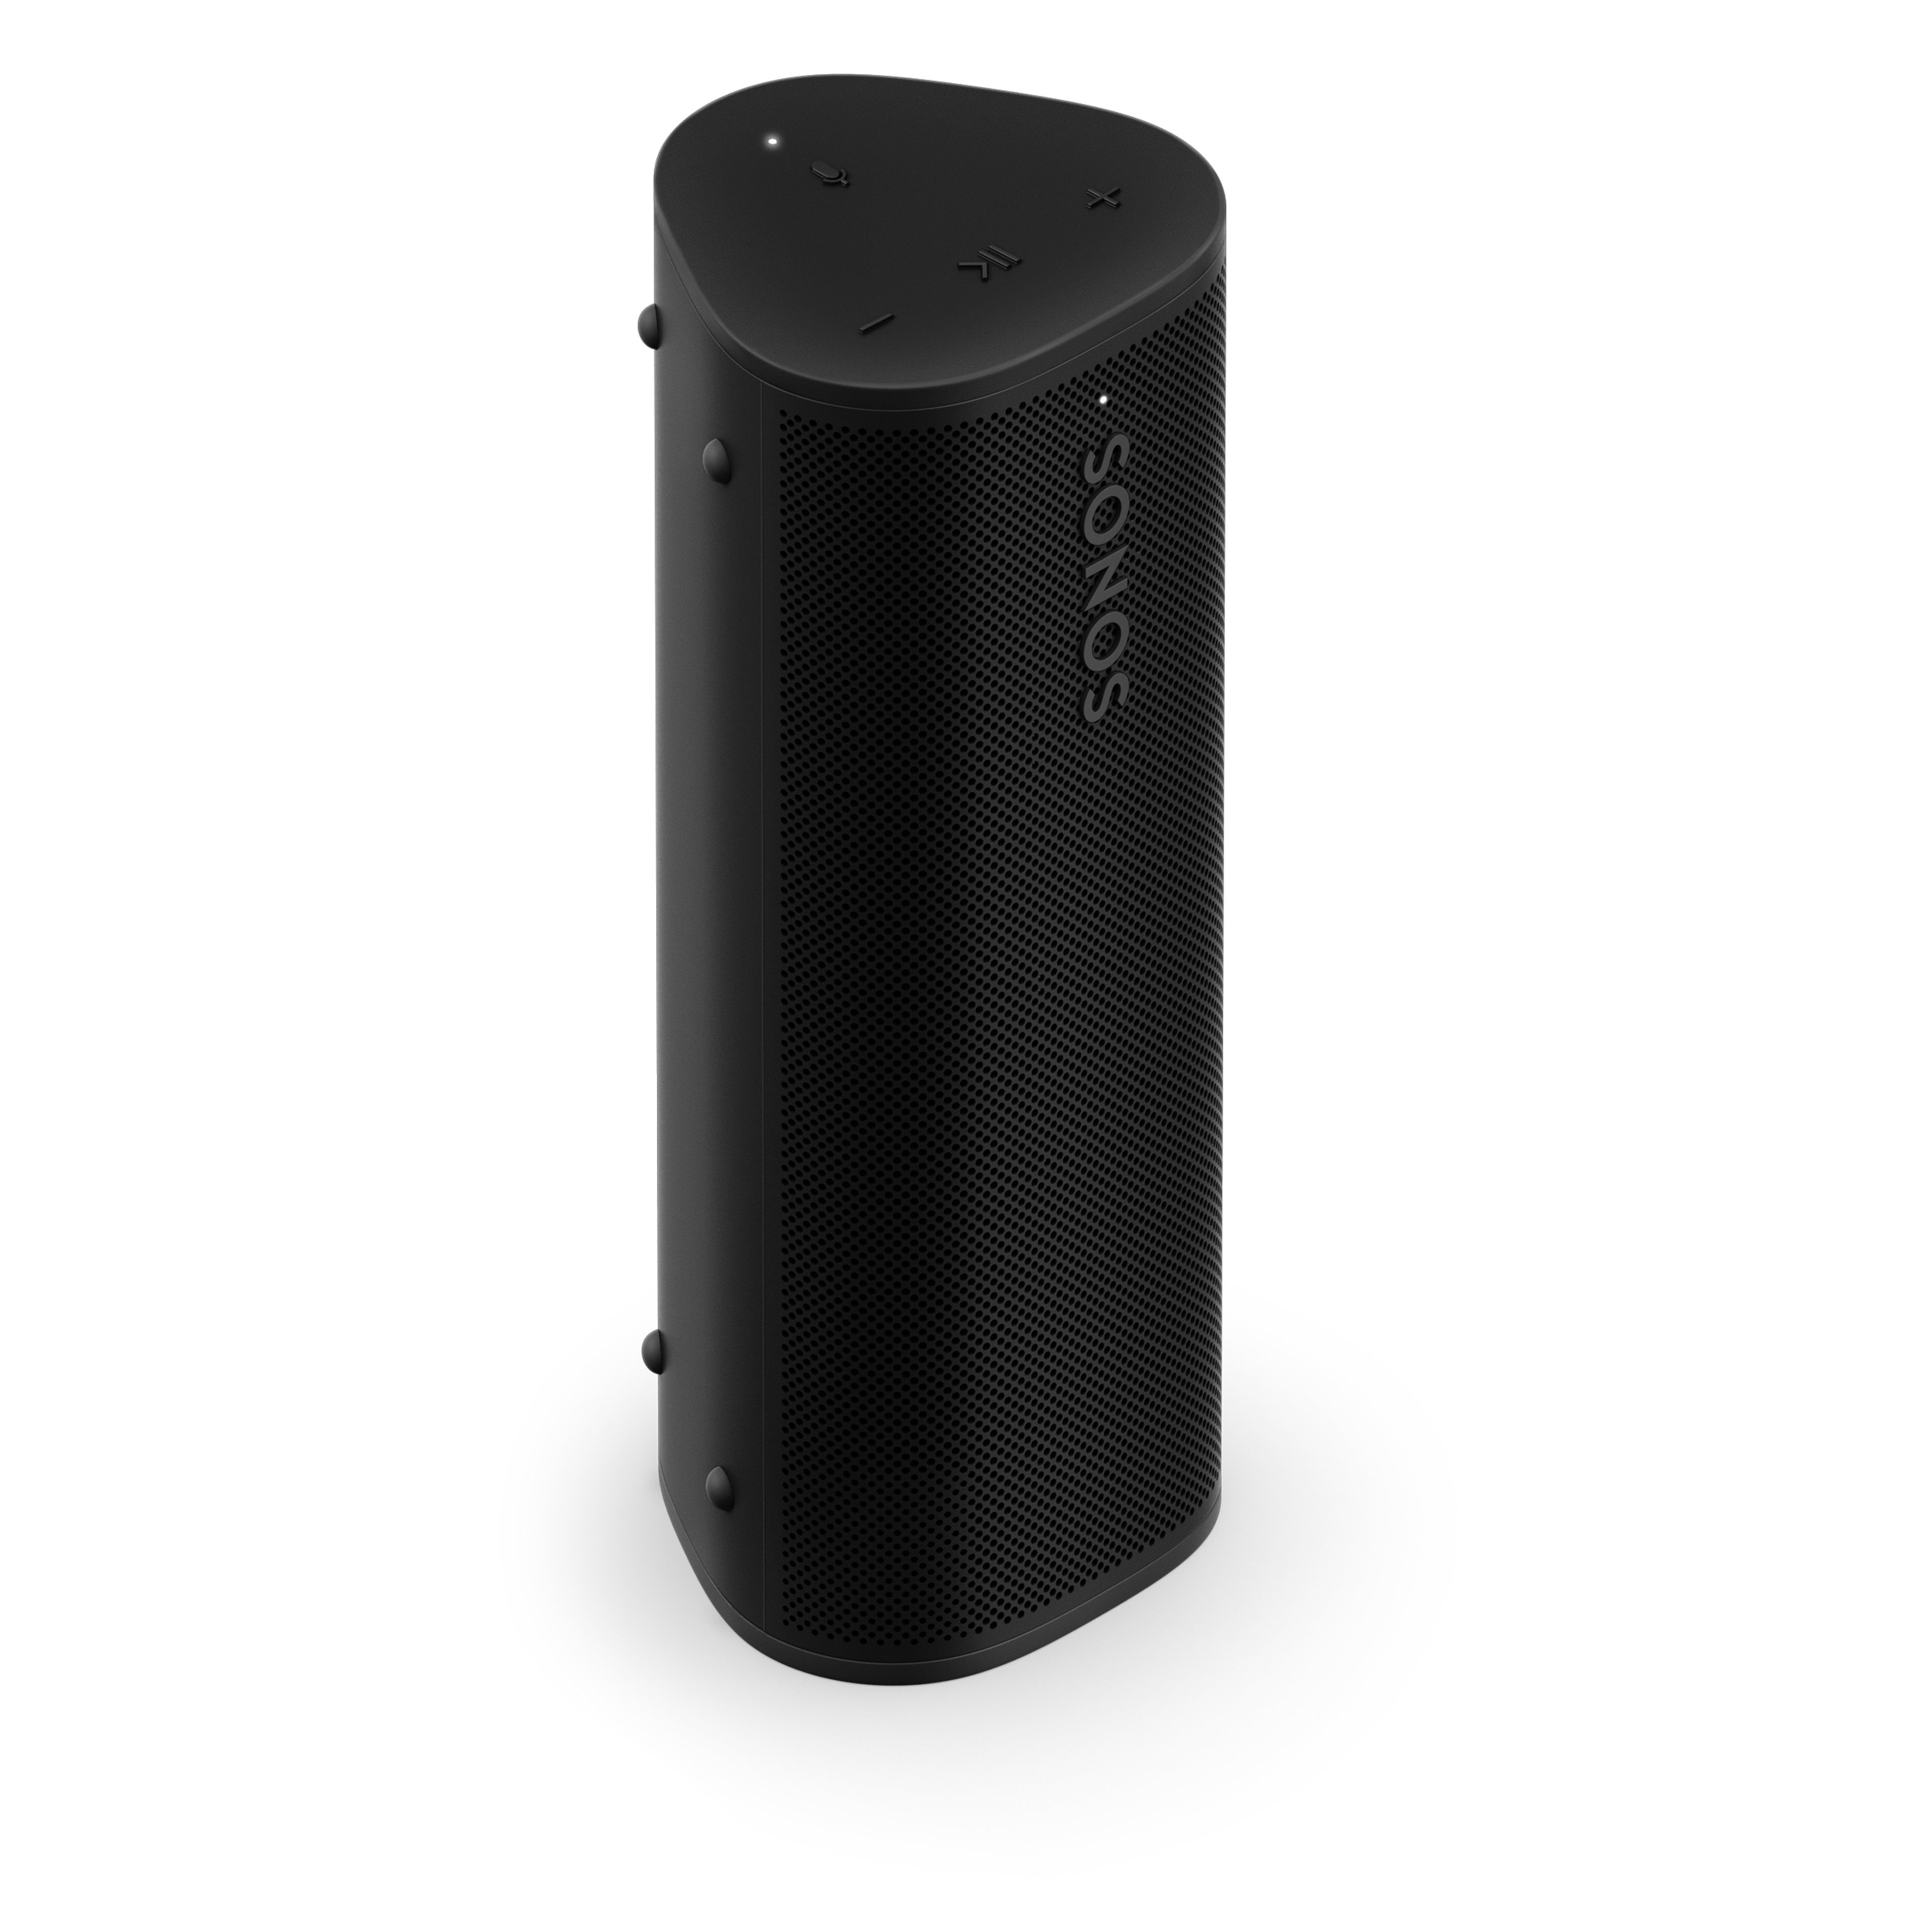 Black Sonos Roam 2 in hero front and top angle